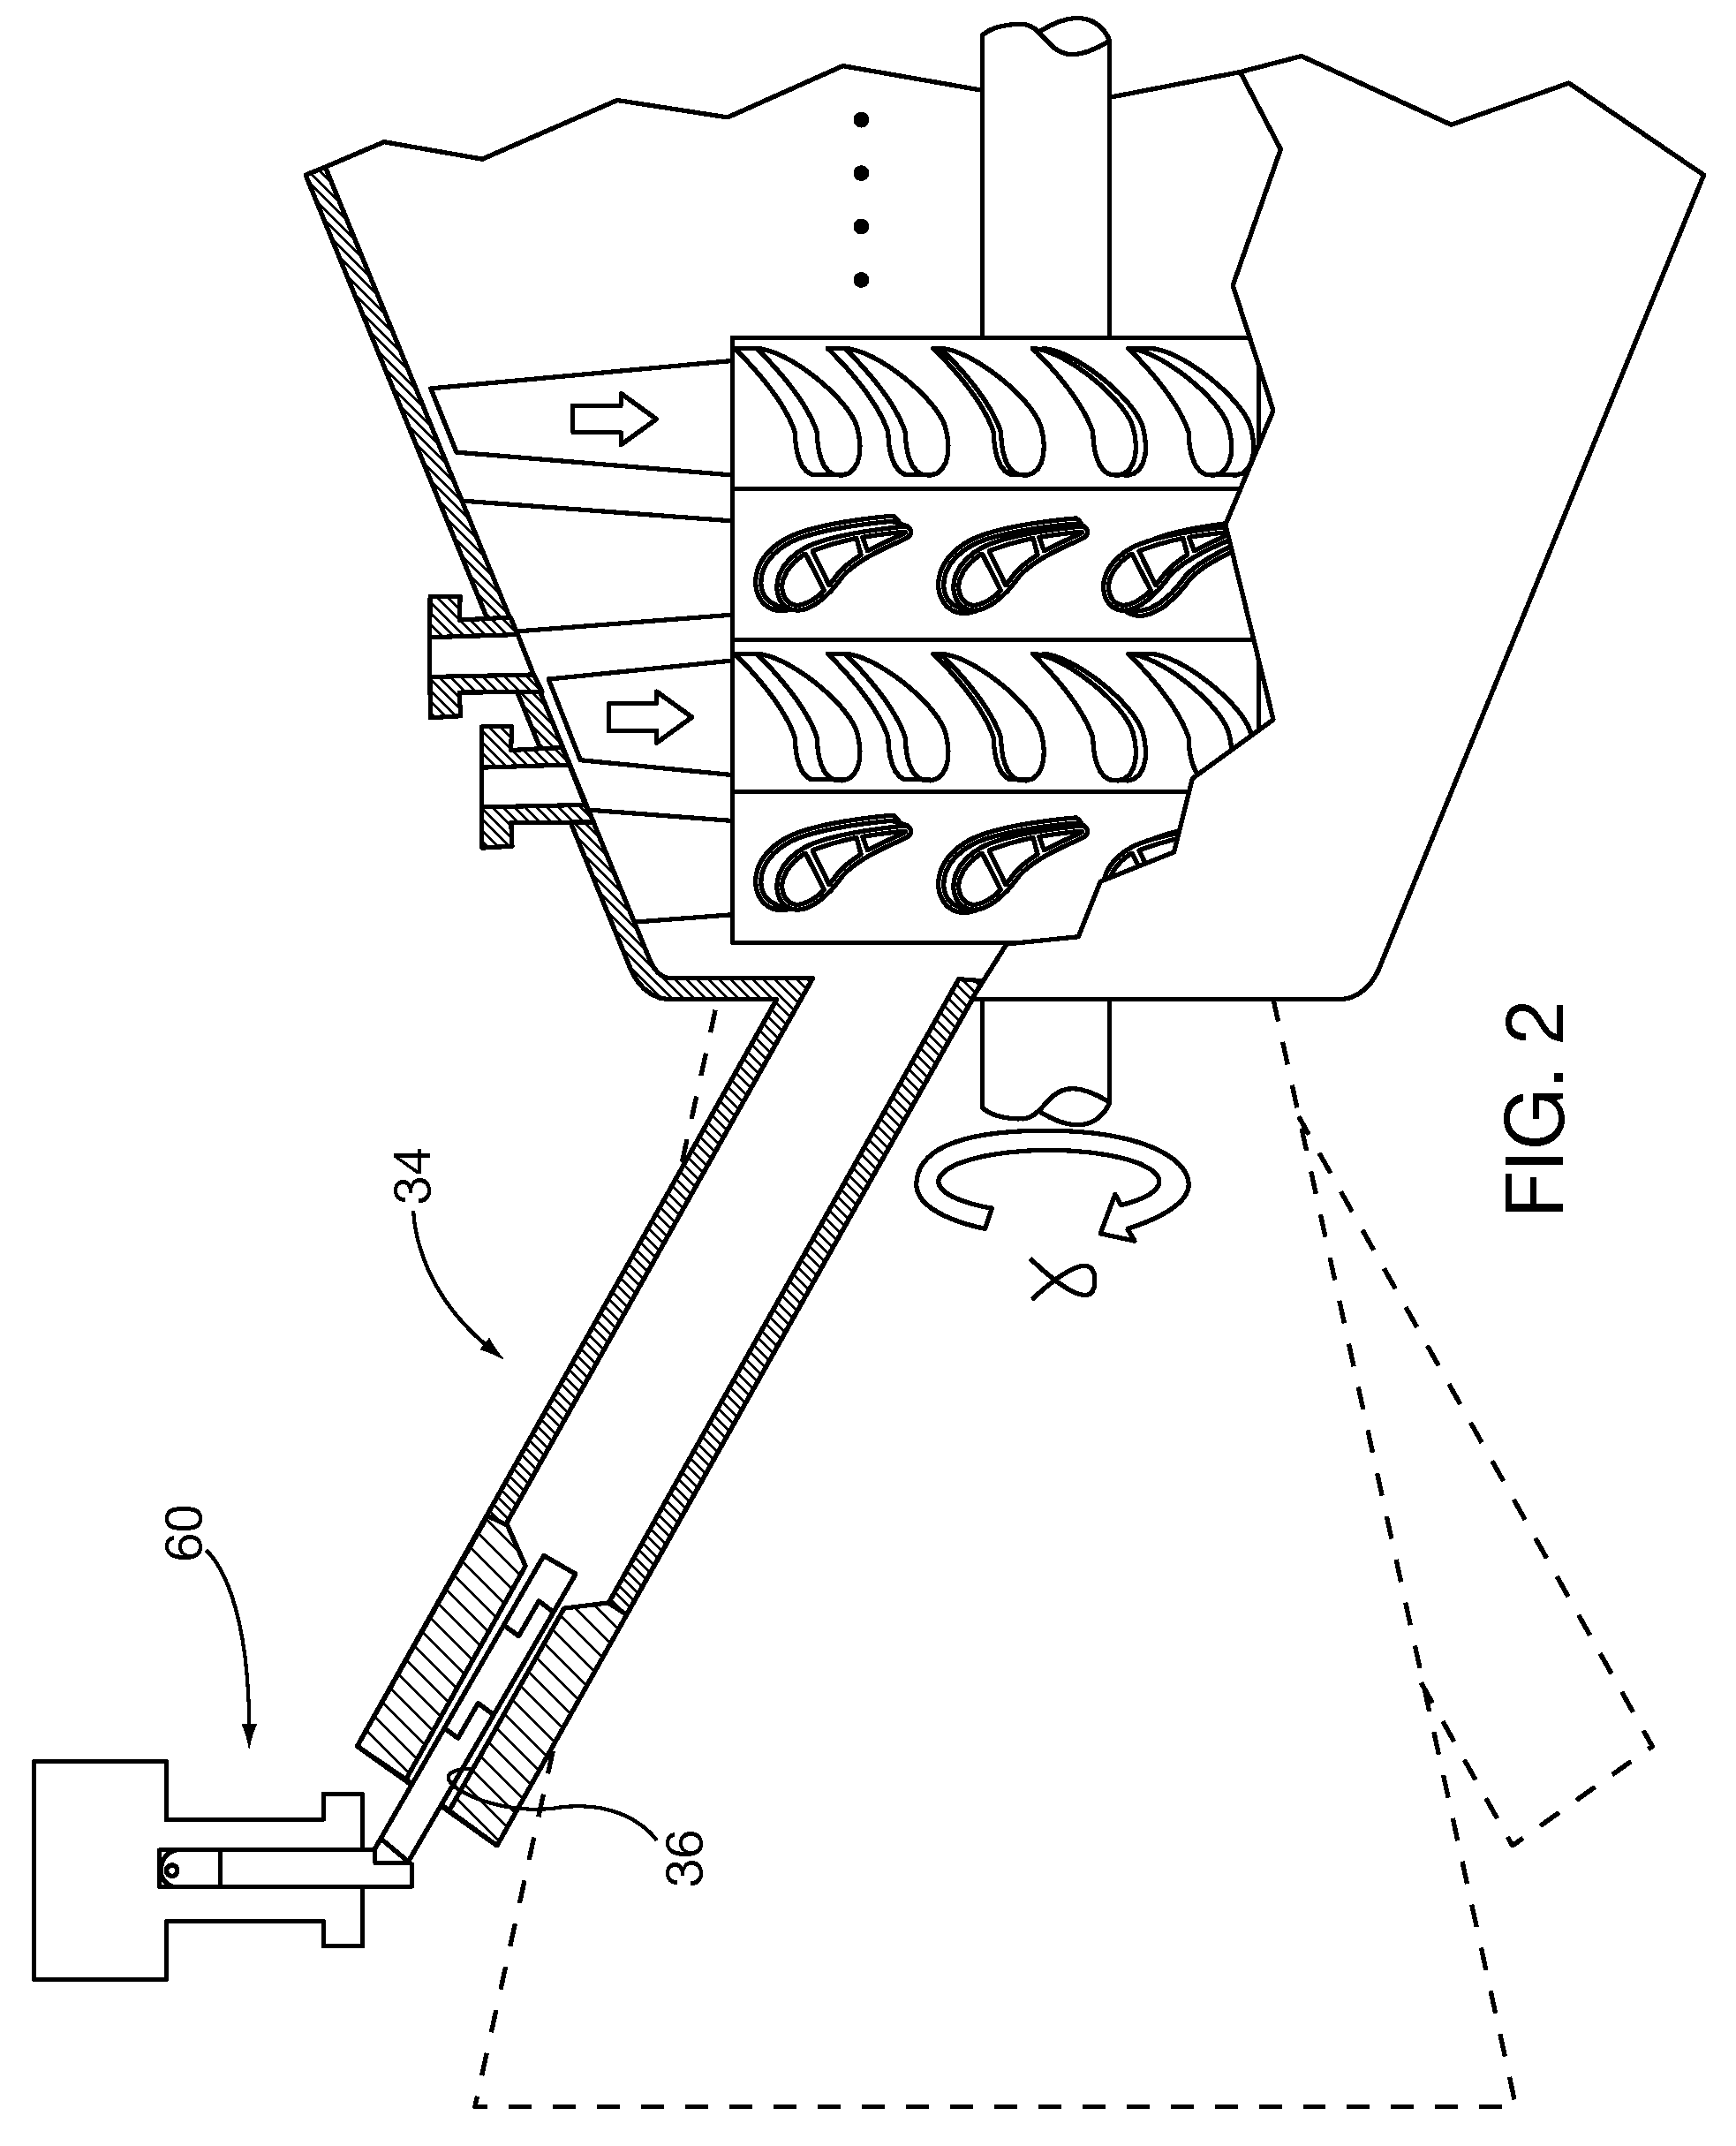 System and method for automated optical inspection of industrial gas turbines and other power generation machinery with multi-axis inspection scope